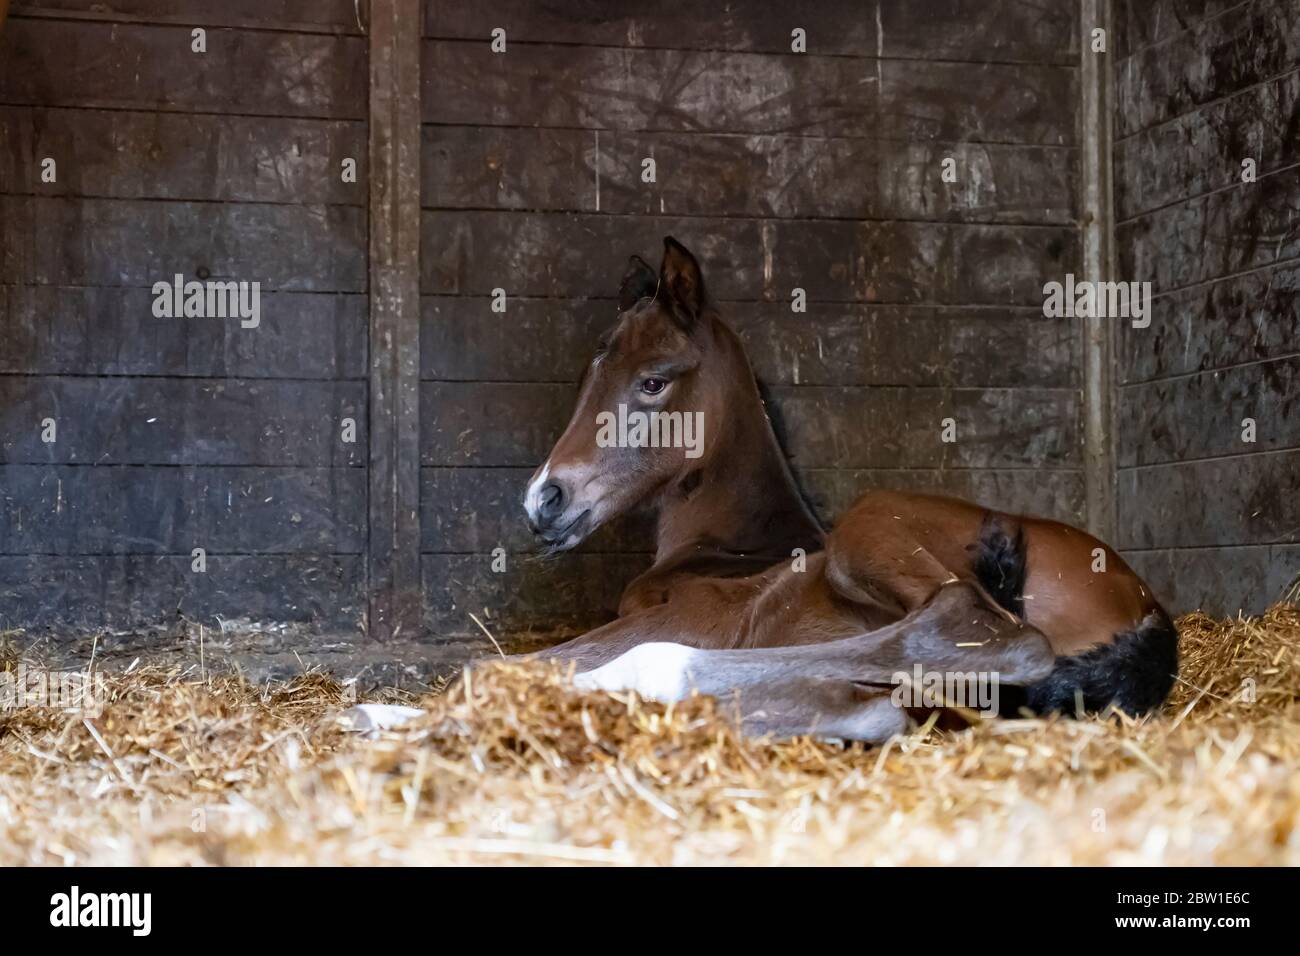 A brown mare foal is born in a horse box, stable, and lies in the straw. Stock Photo